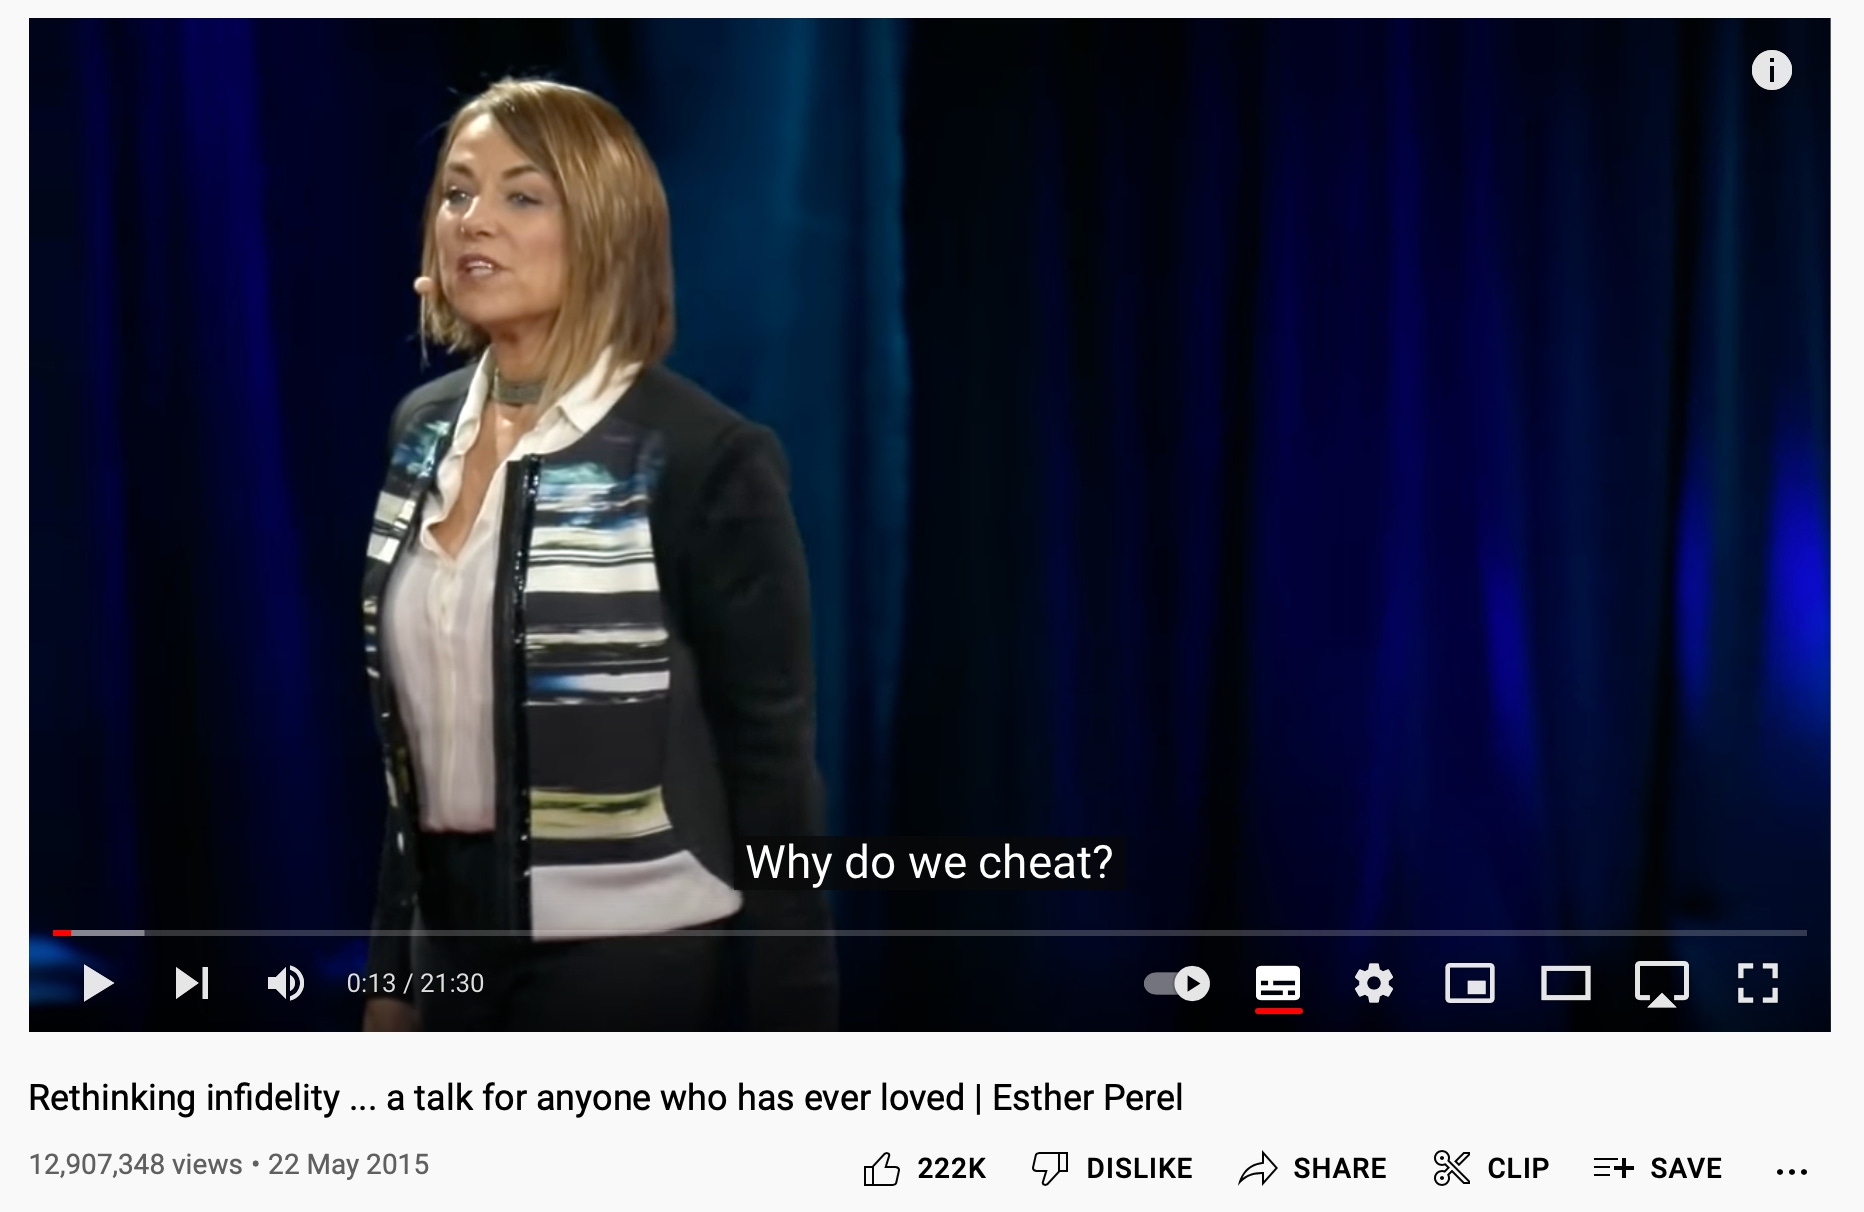 The icky phenomenon of Esther Perel pic